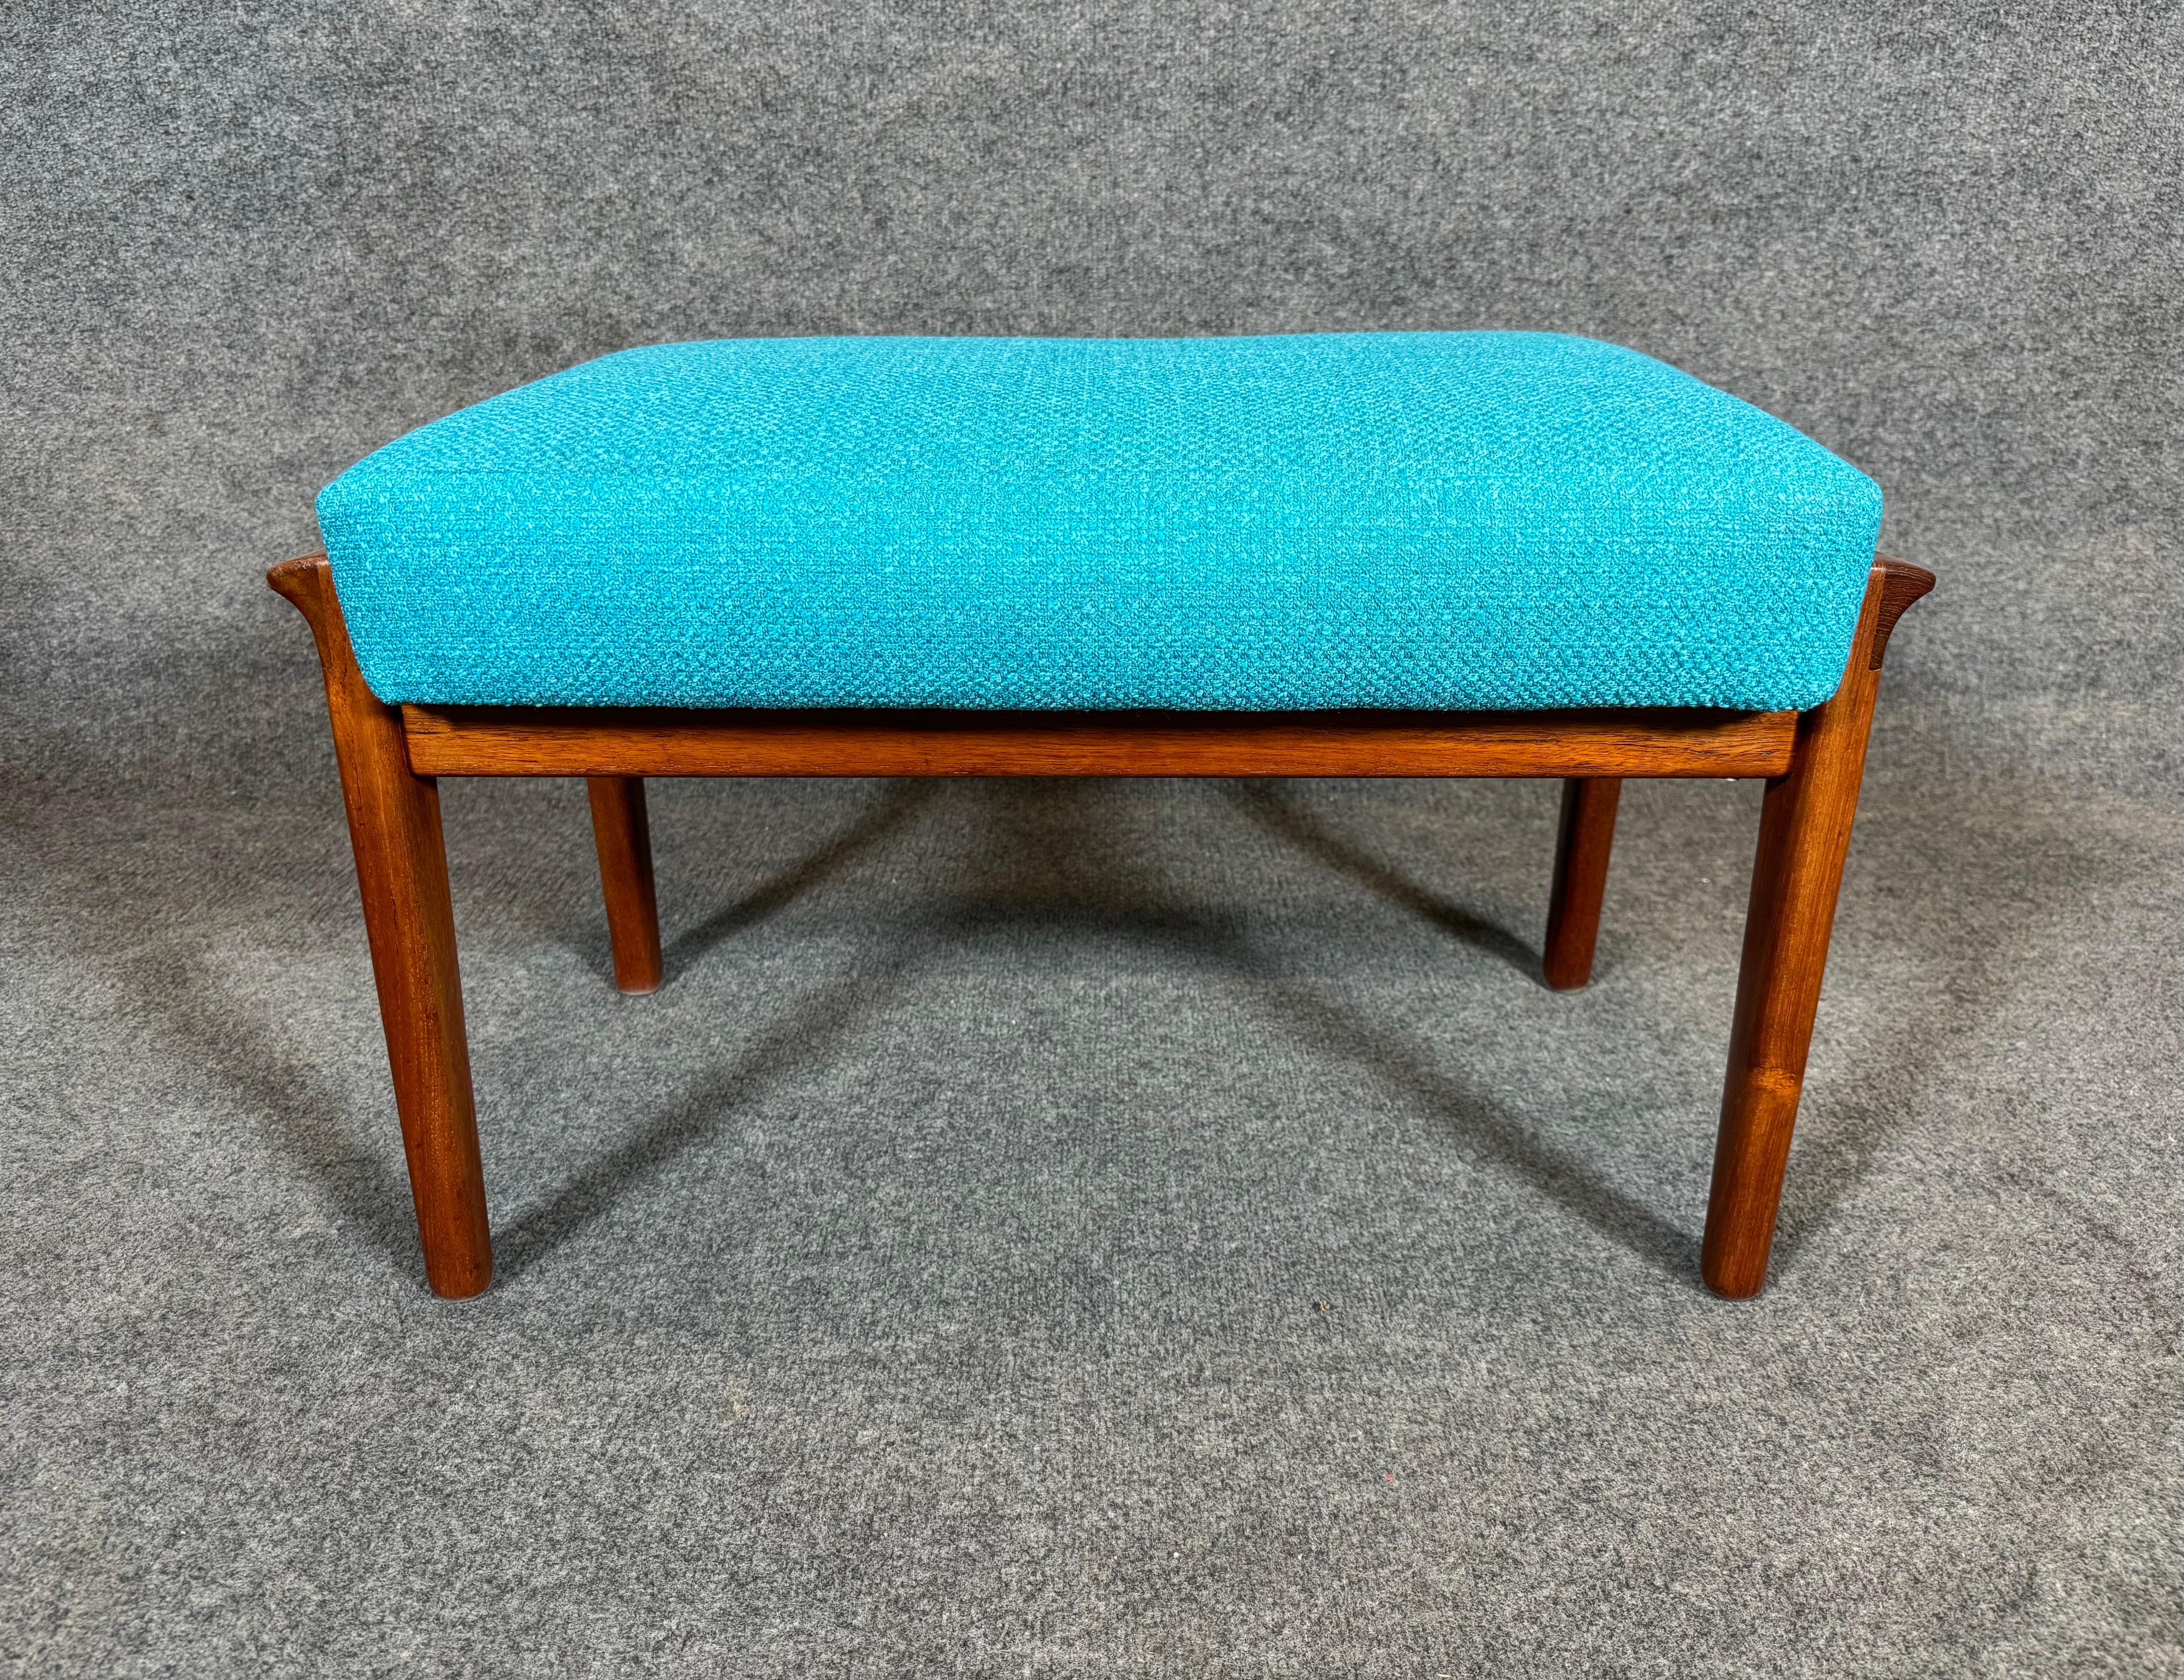 Vintage Danish Mid Century Modern Teak Lounge Chair and Ottoman by Grete Jalk For Sale 2